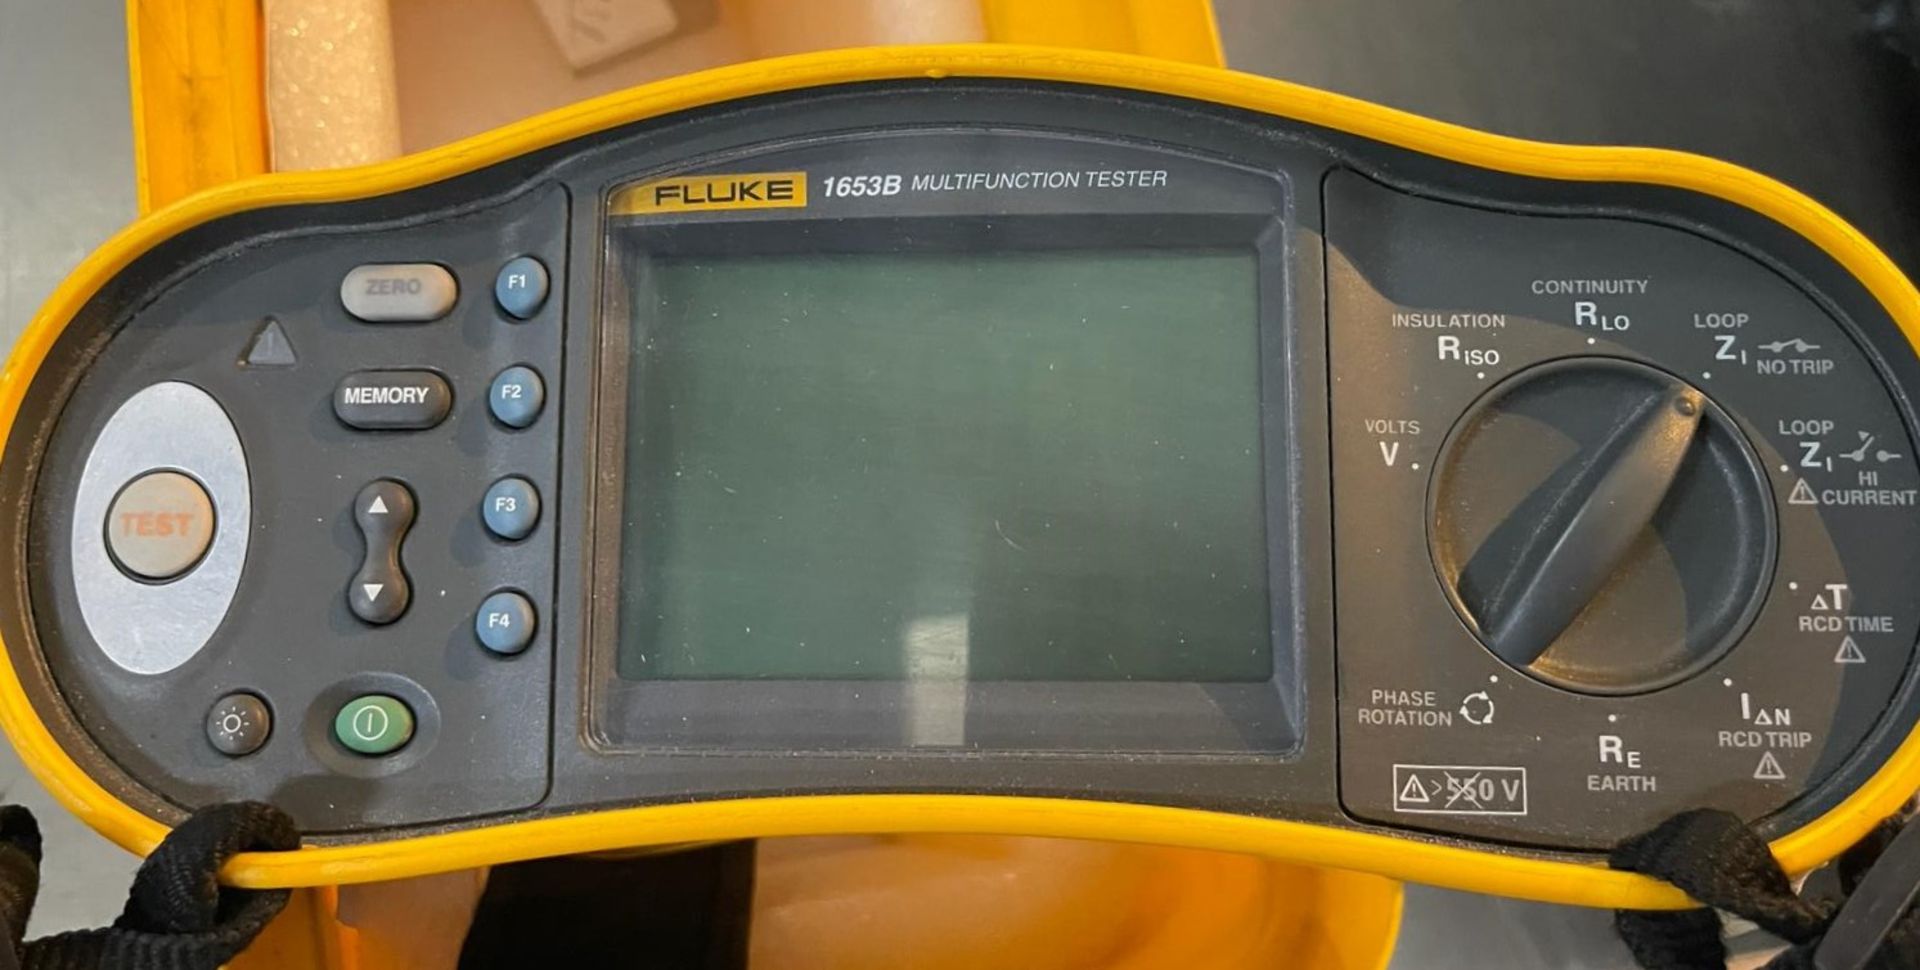 1 x Fluke 1653B Multifunction Tester - Includes Carry Case and Accessories - Image 2 of 12